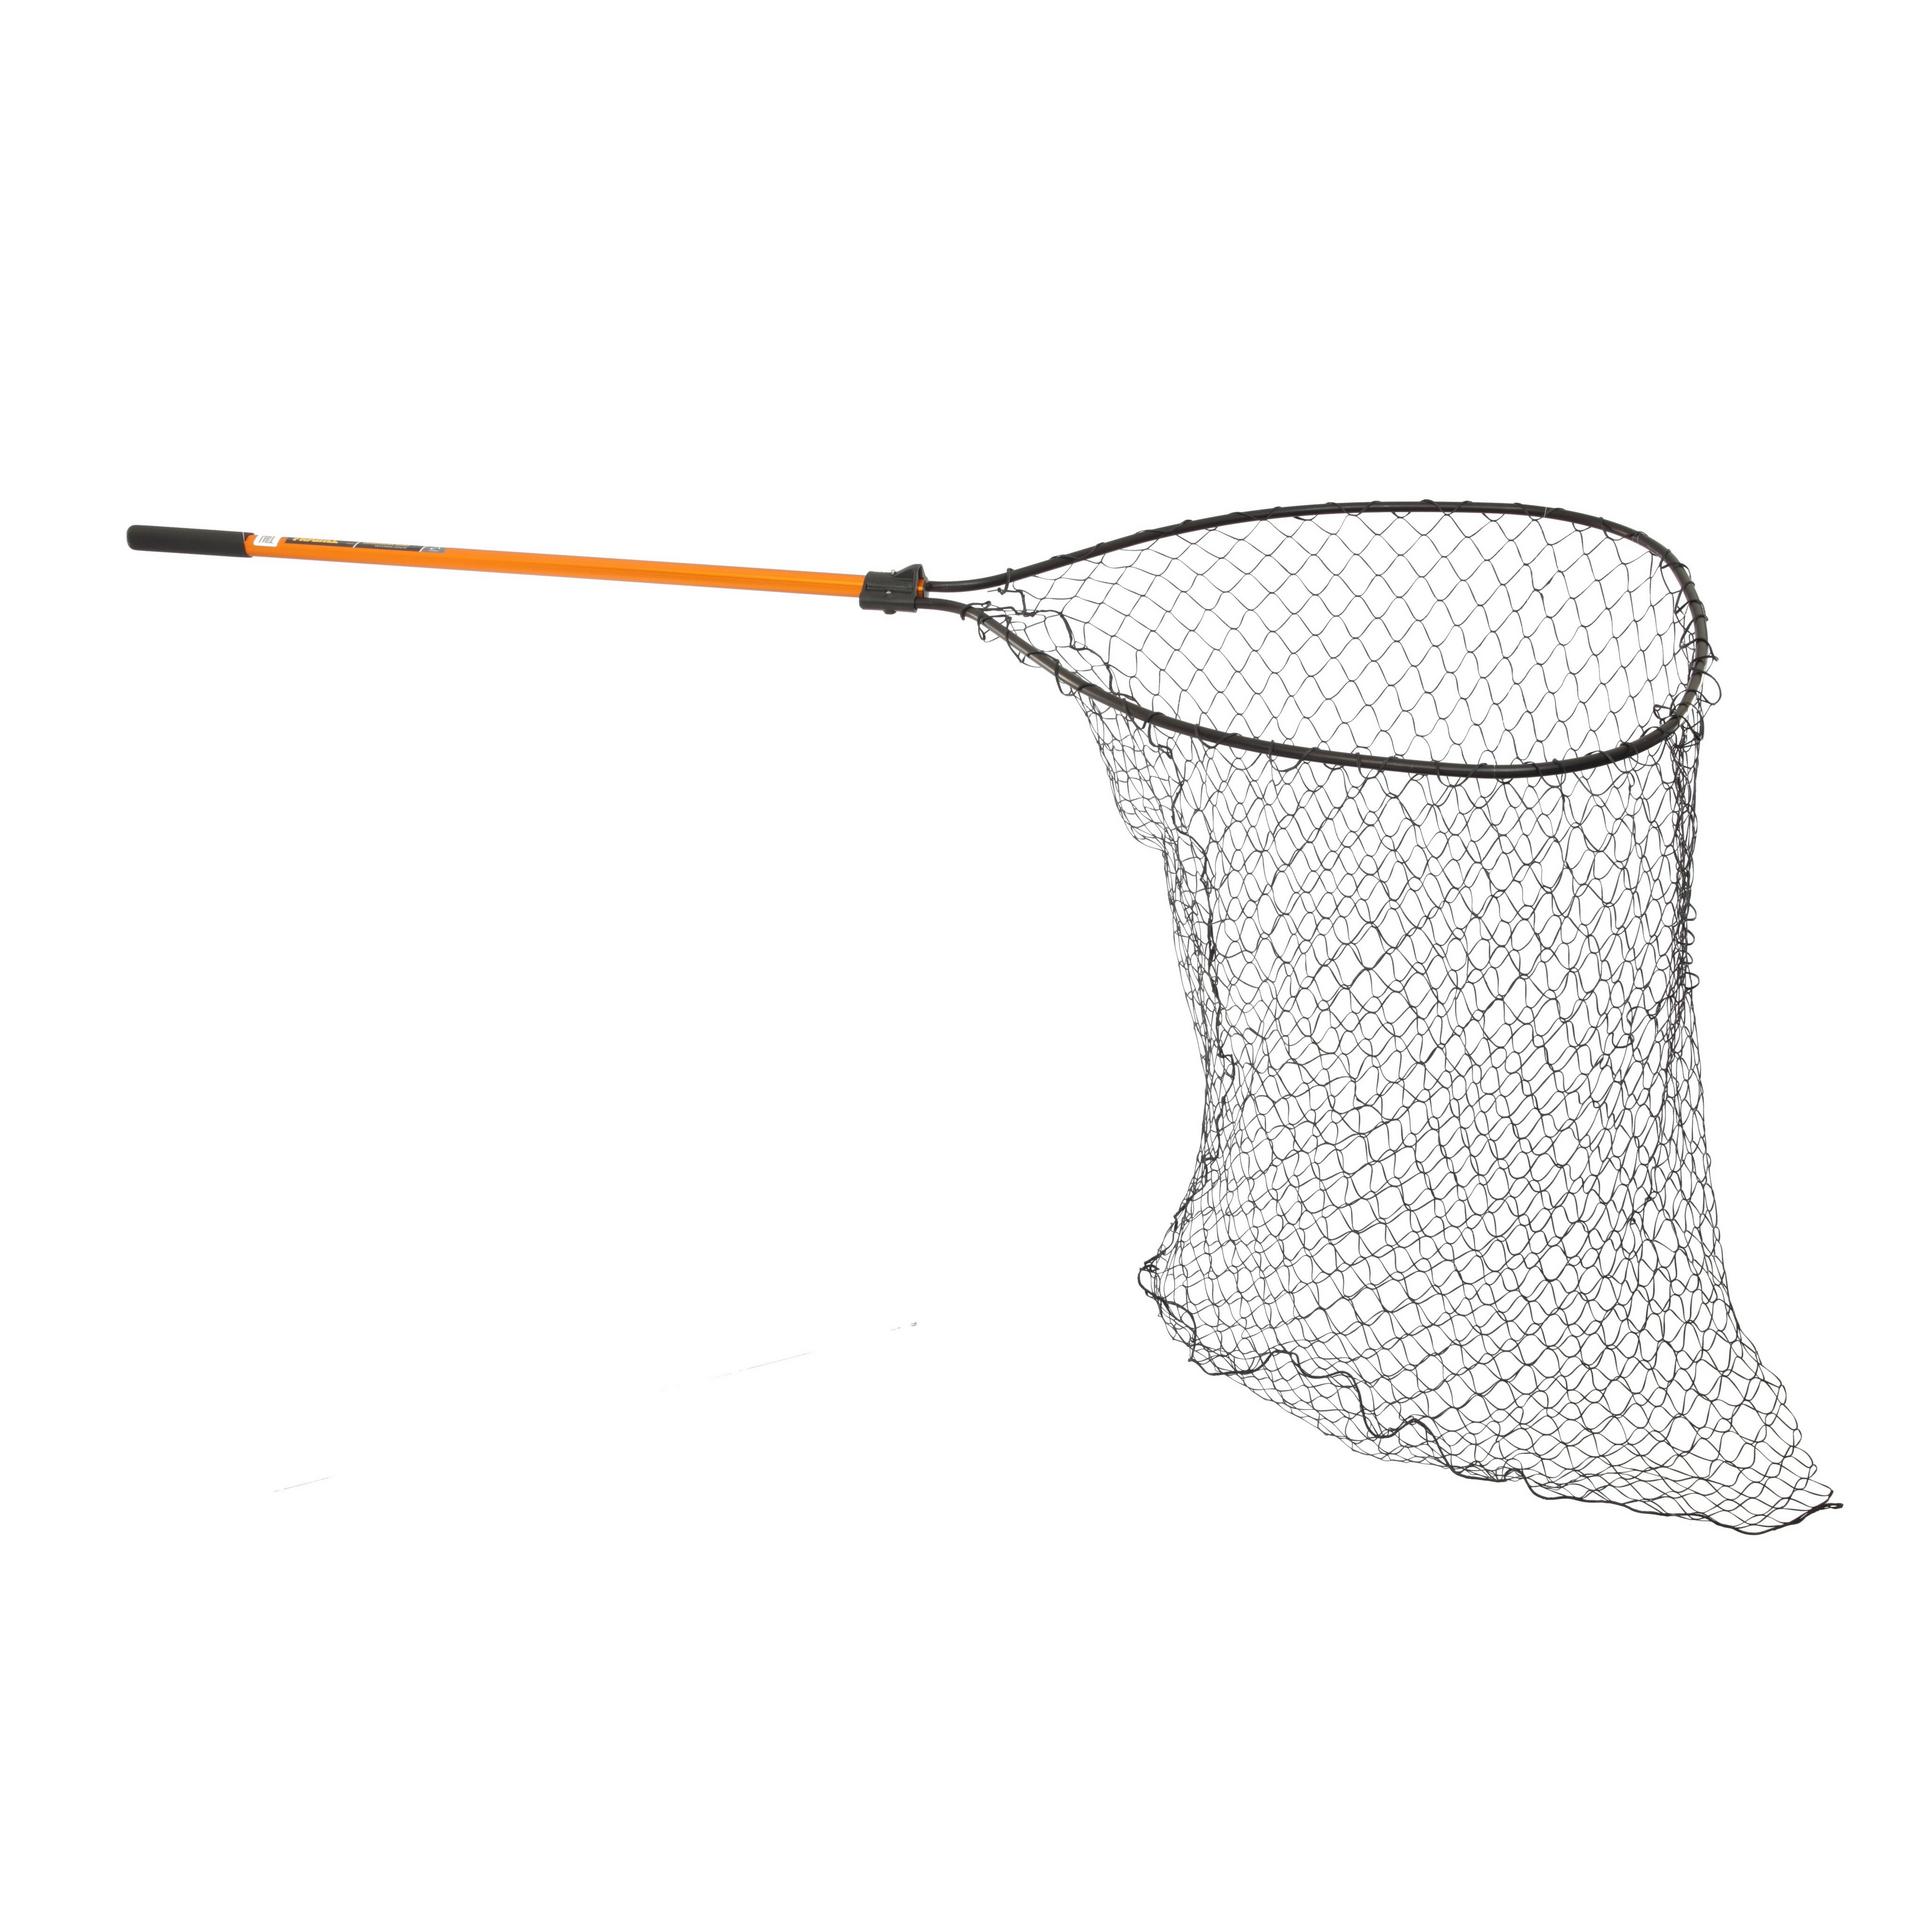 FRABILL RED LEAF CONSERVATION LANDING NET CAMLOCK REINFORCED HANDLE  20x23-INCH